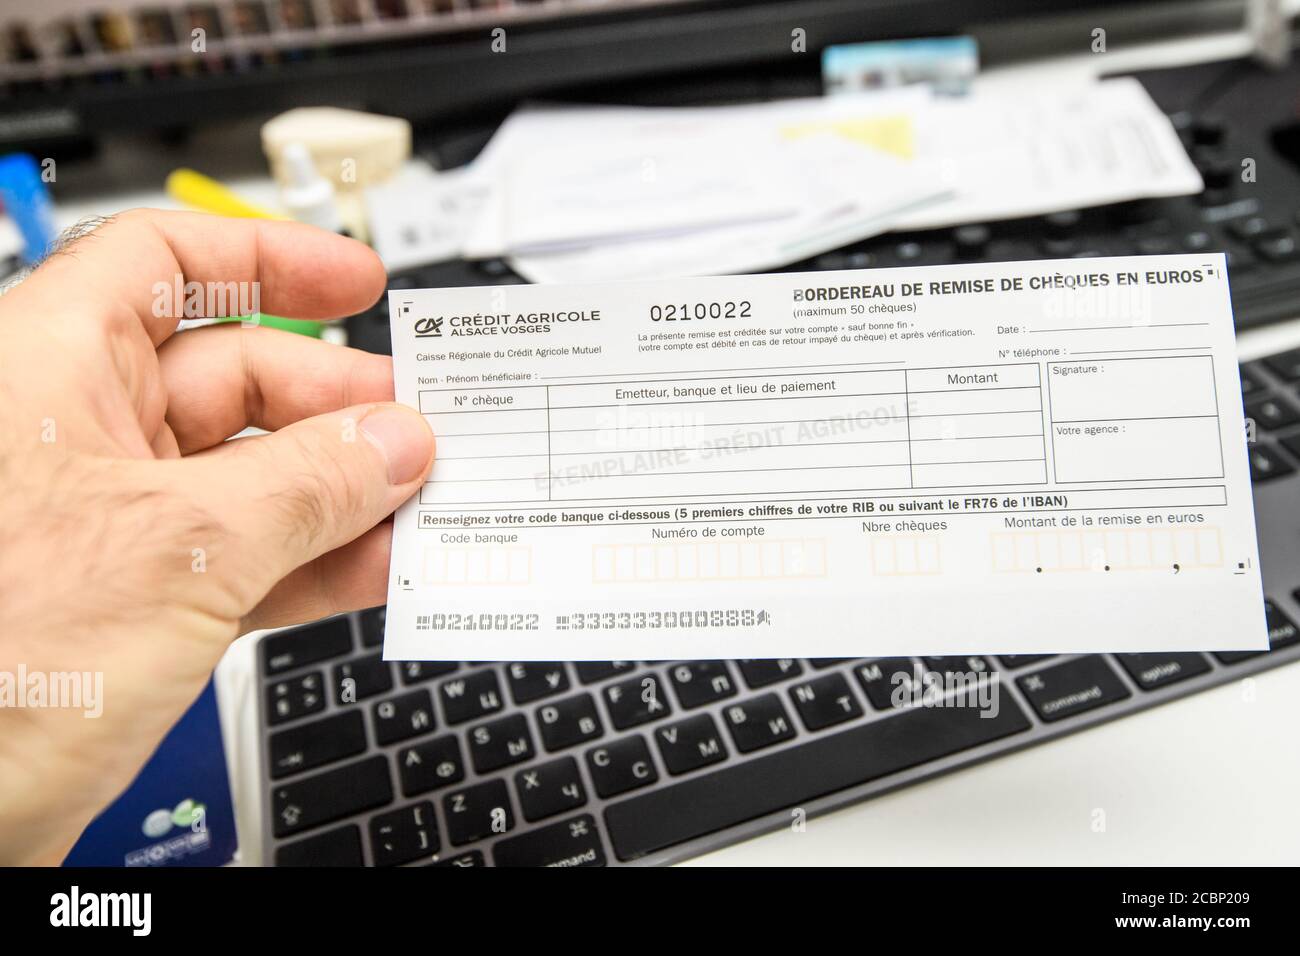 Paris, France - Nov 15, 2019: Man hand holding above computer keyboard Credit Agricole French bank remittance slip for checks in euros Stock Photo